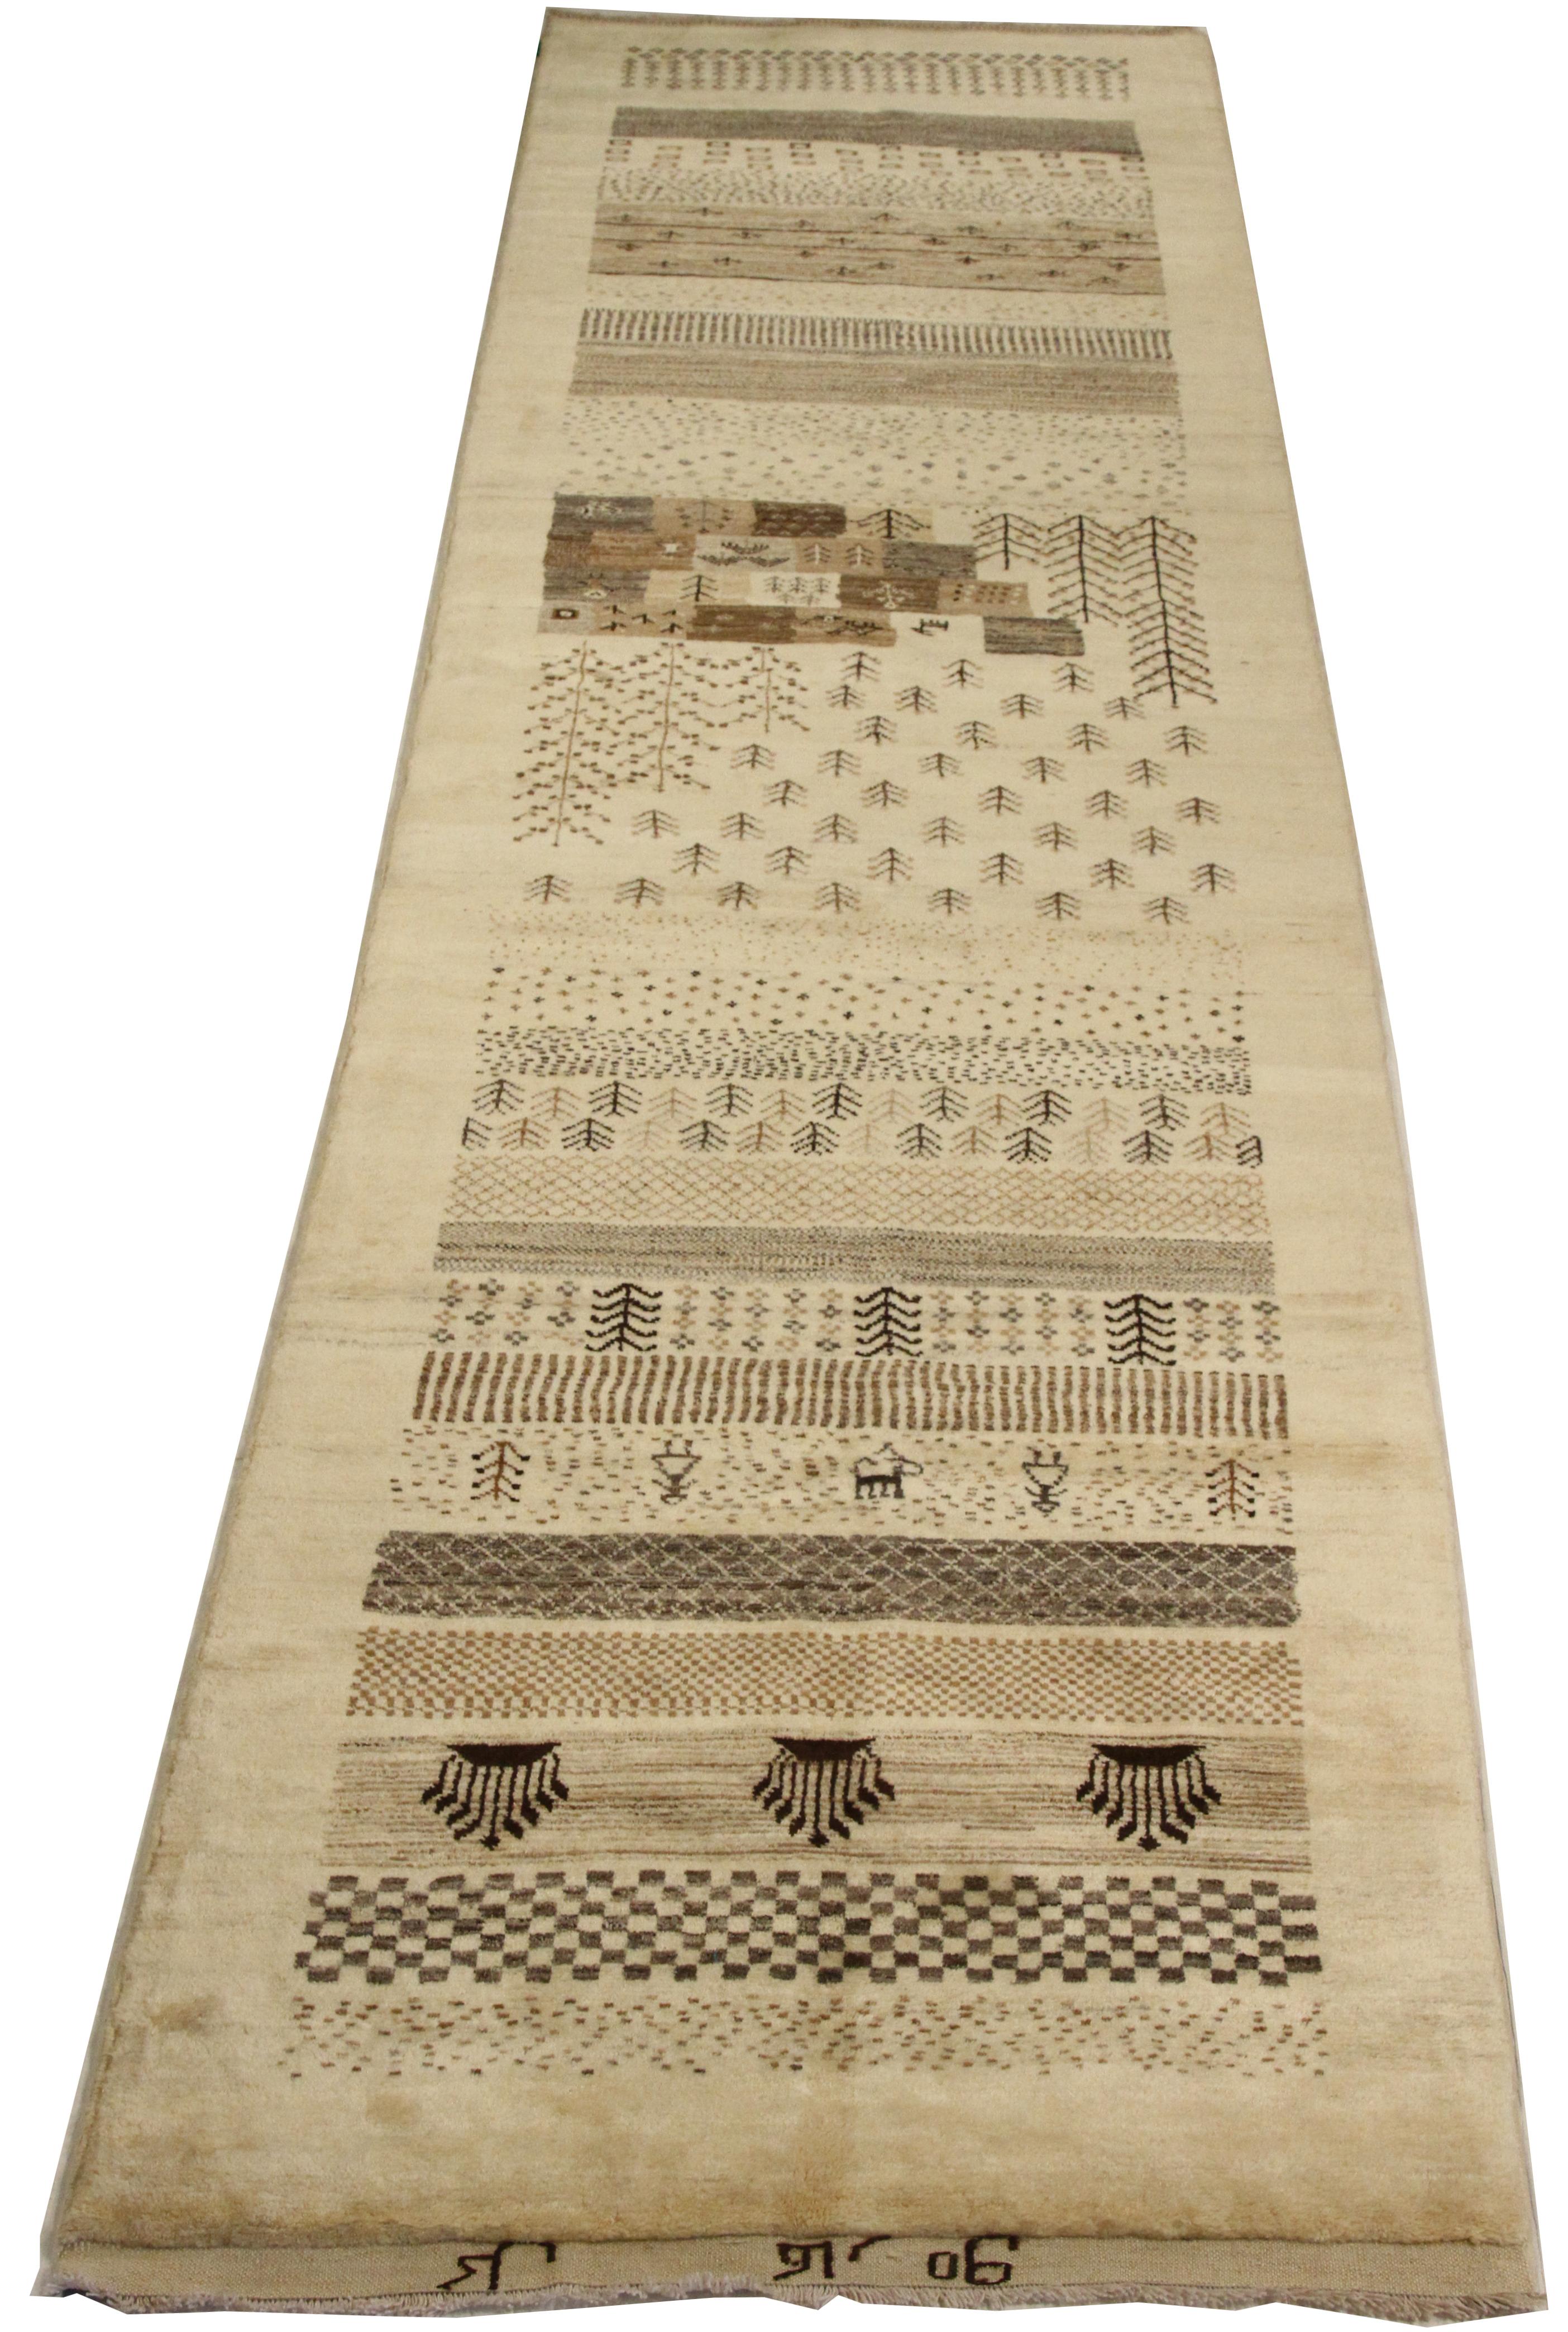 Vintage handwoven Persian runner rug made from fine wool and all-natural vegetable dyes that are safe for people and pets. This beautiful piece features simple geometric patterns which Gabbeh rugs are known for. Persian tribal rugs like Gabbeh are